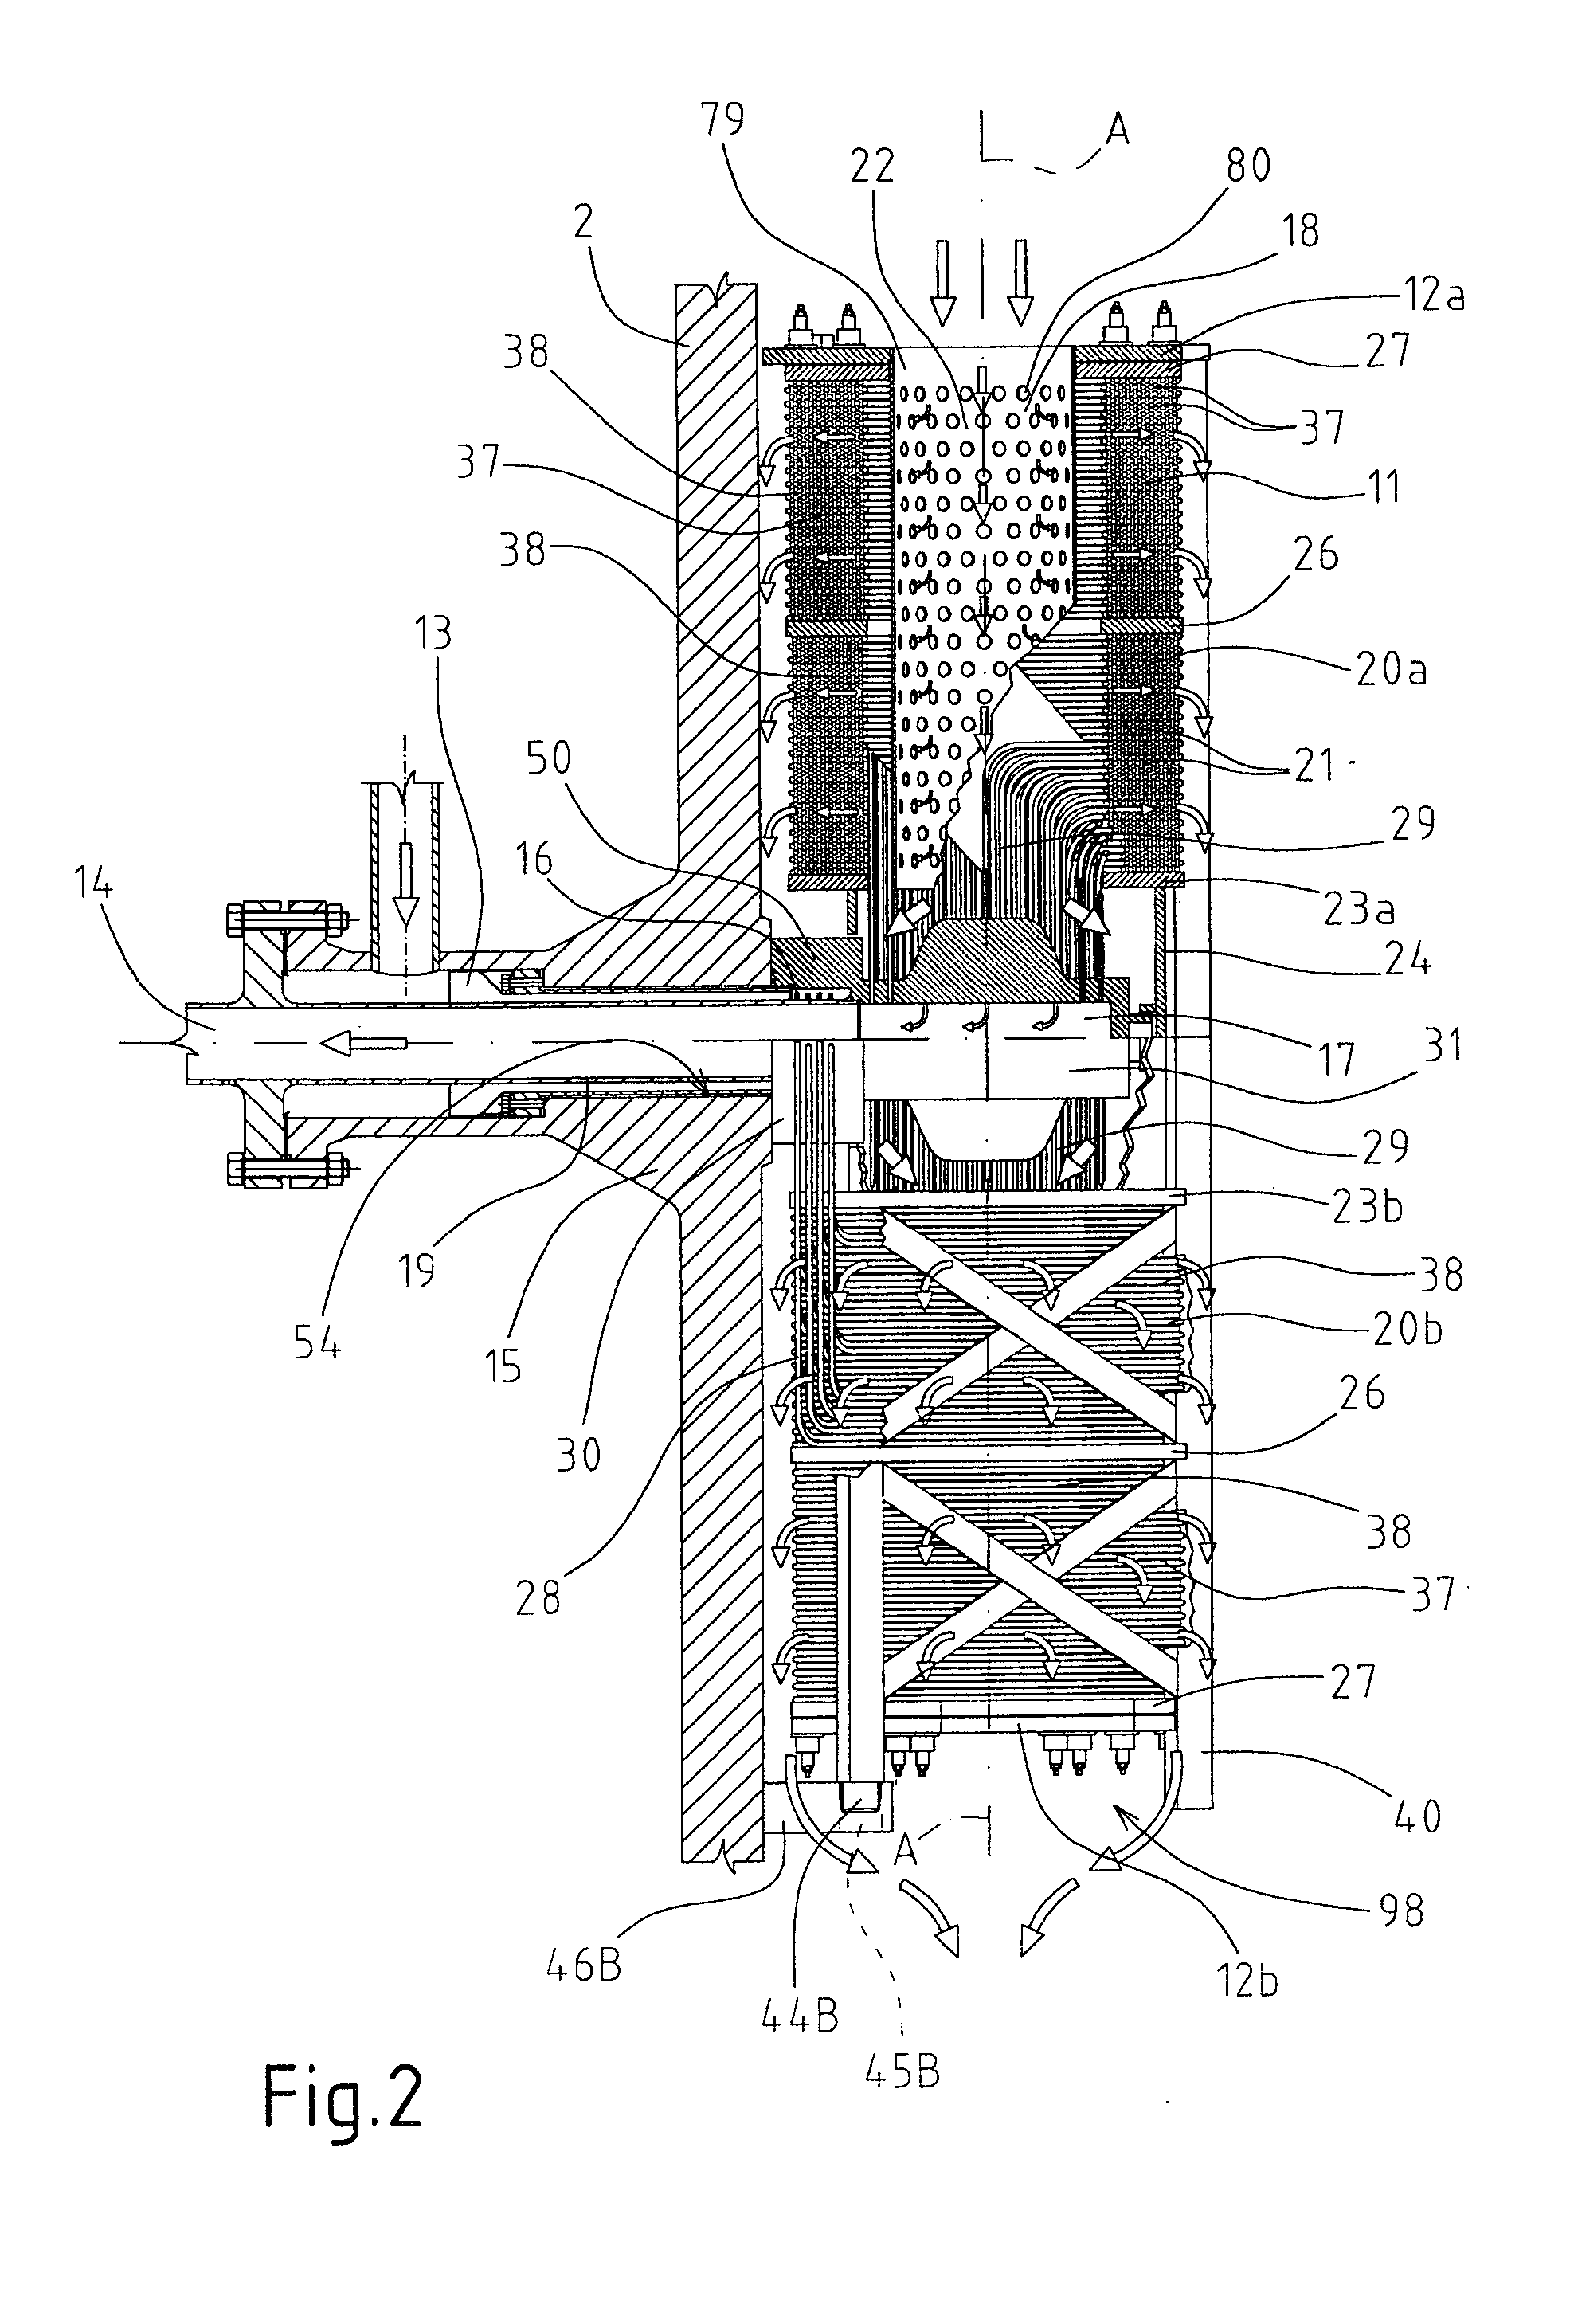 Pressurized-water-cooled nuclear reactor with compact steam generators